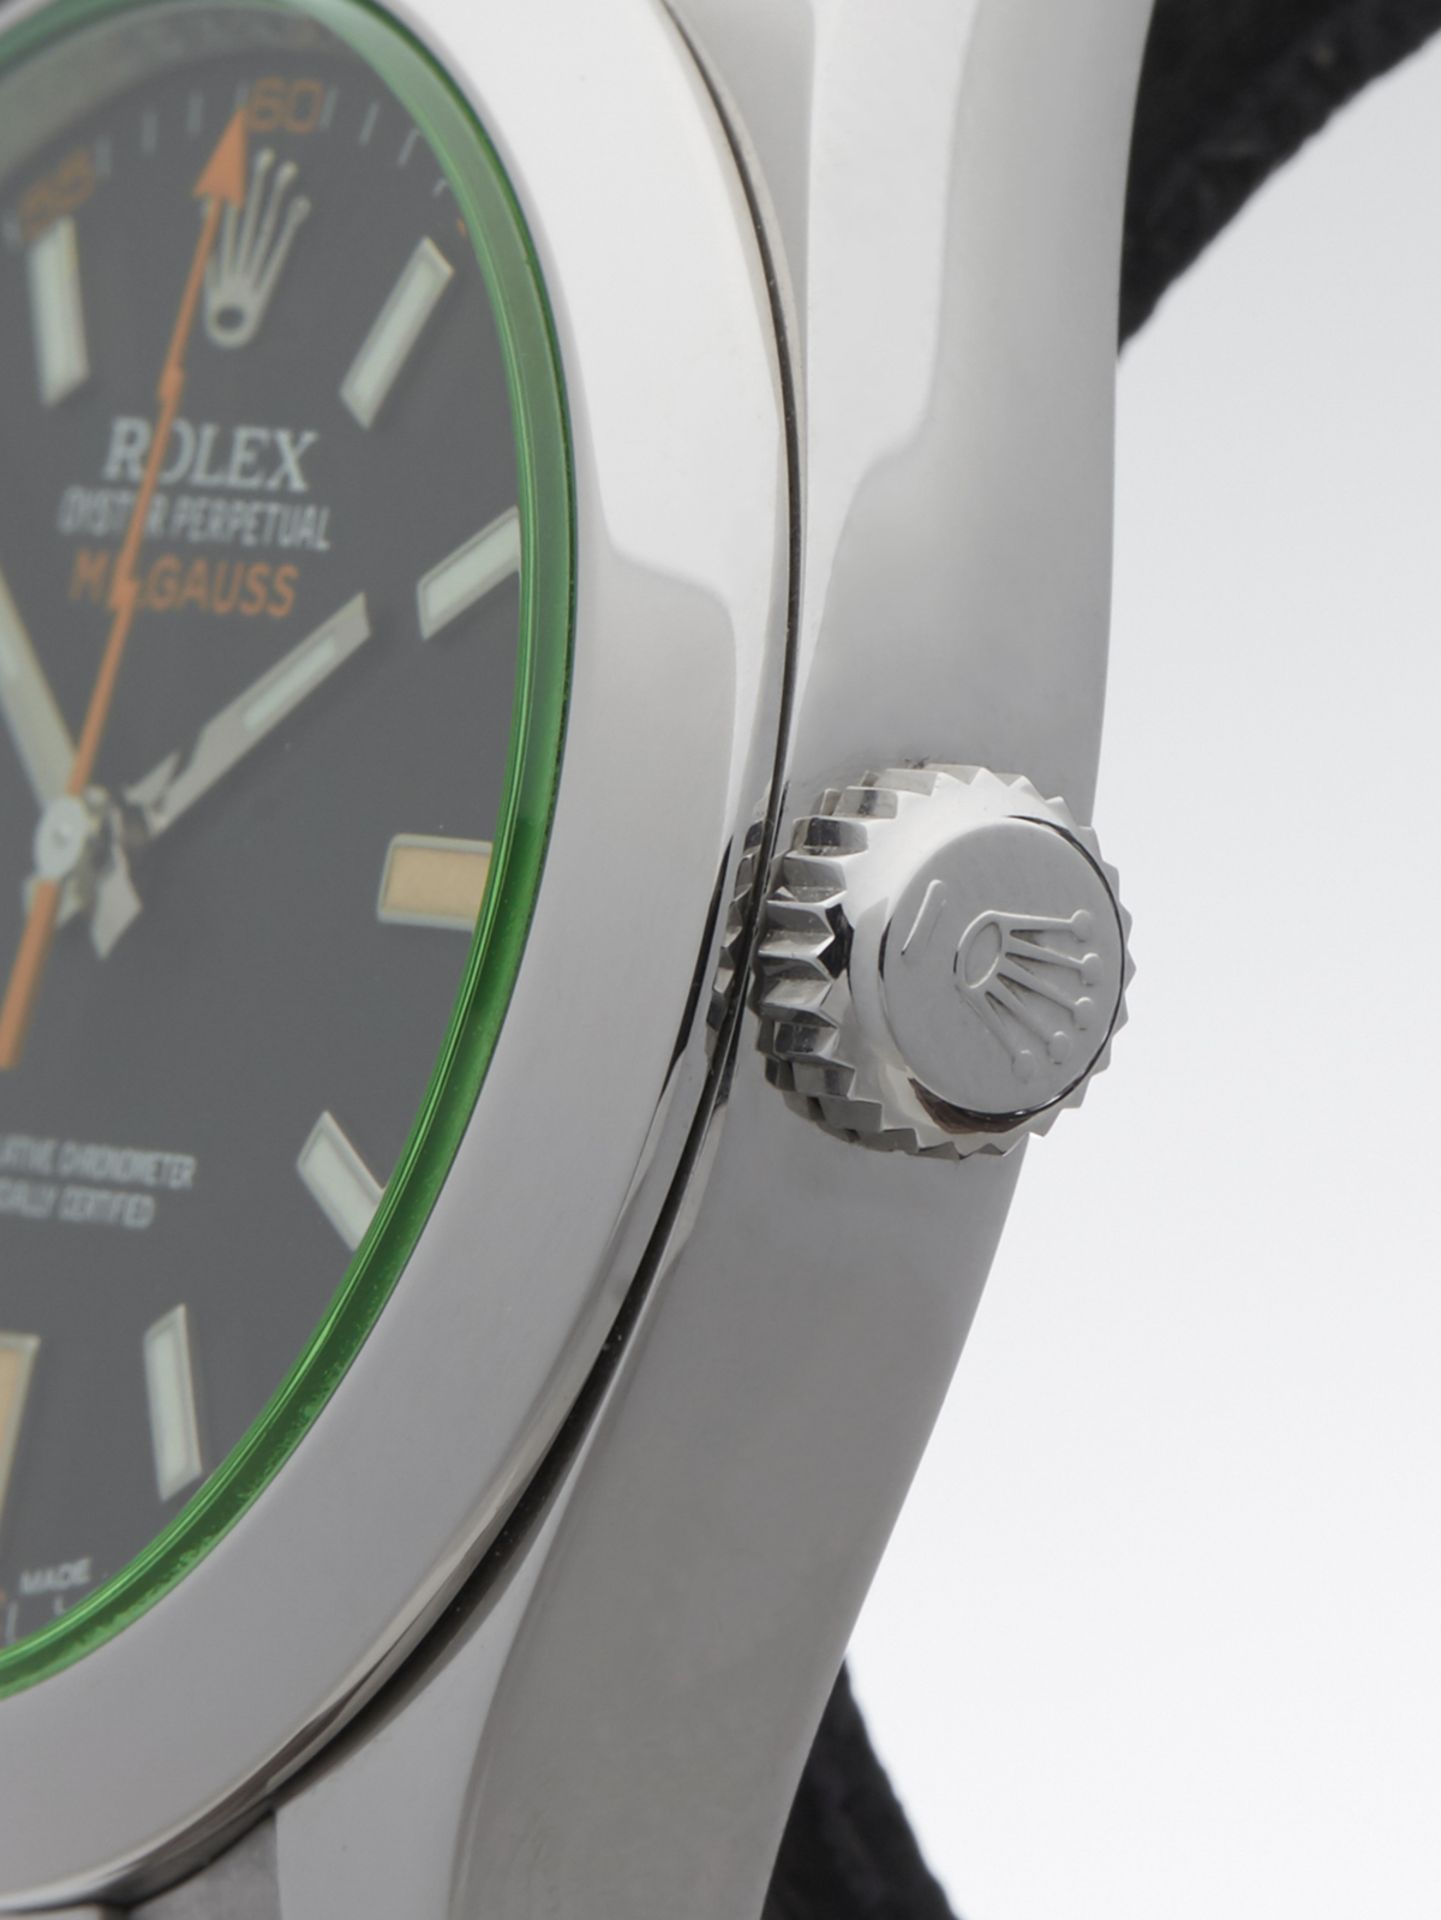 Rolex Milgauss Green Glass 40mm Stainless Steel 116400GV - Image 4 of 9